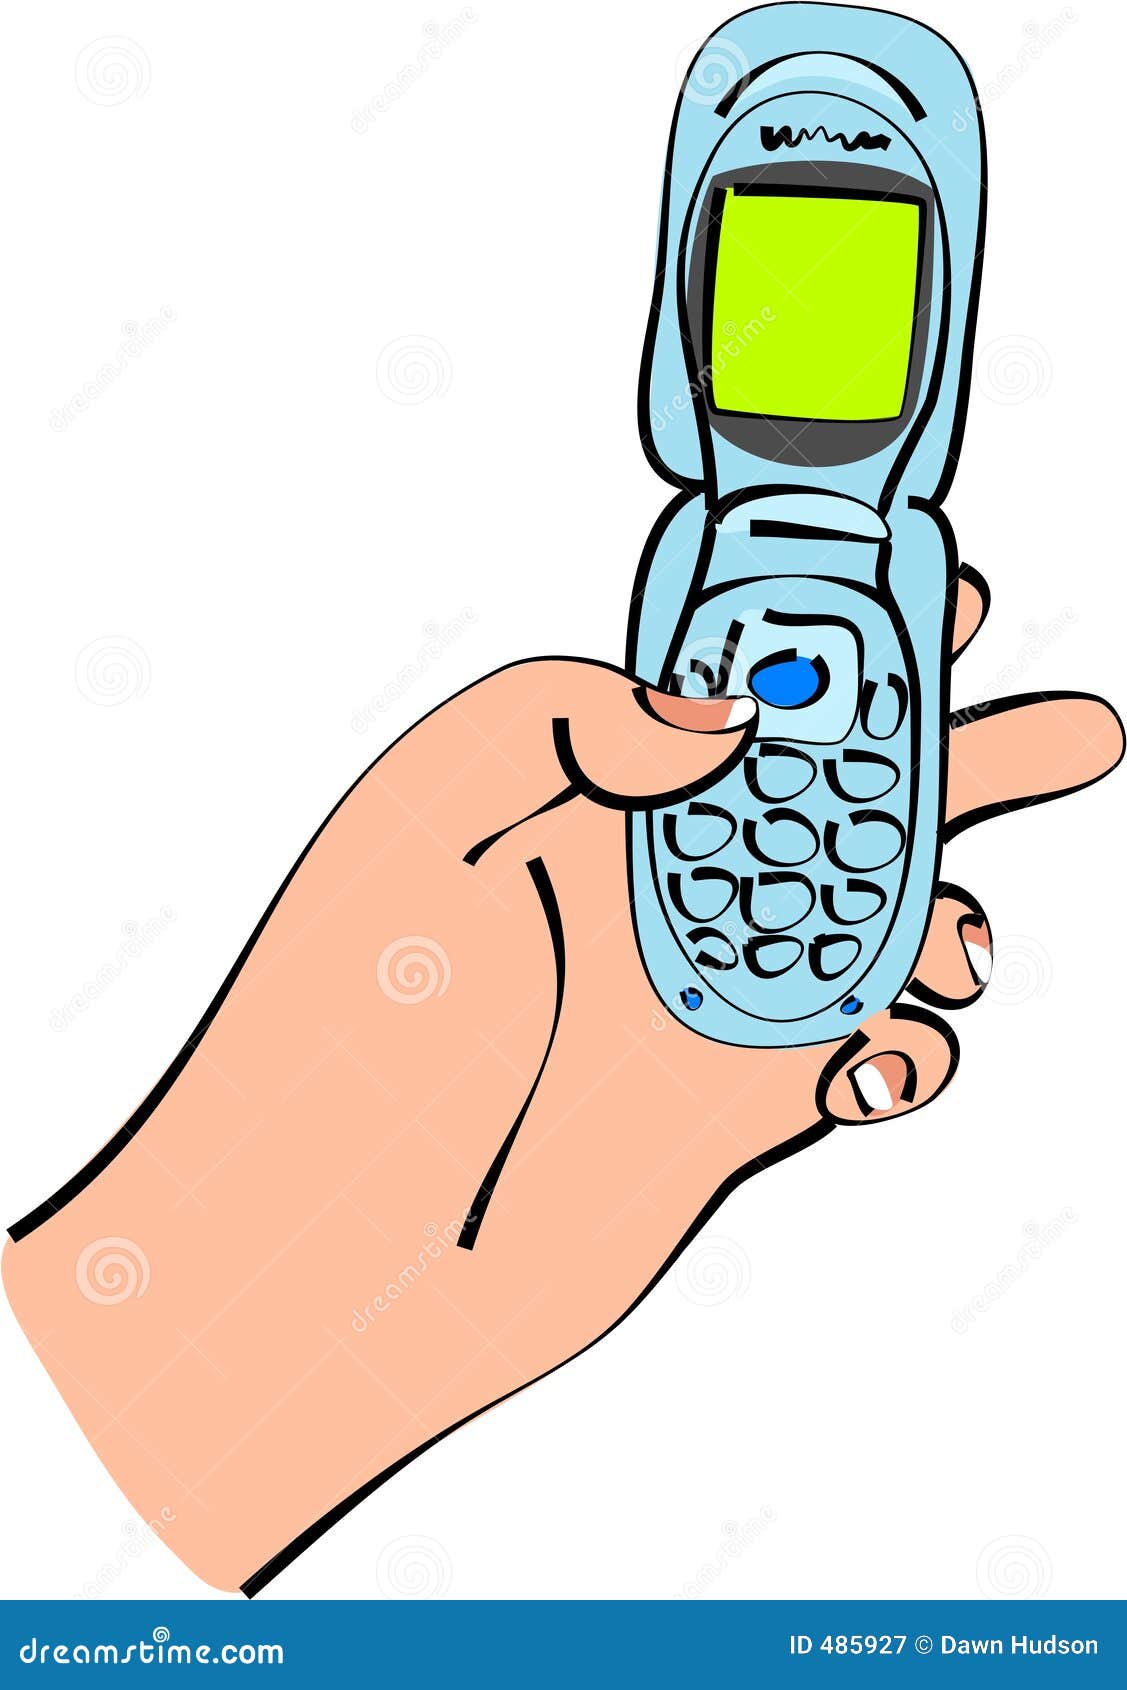 mobile phone text clipart - photo #36